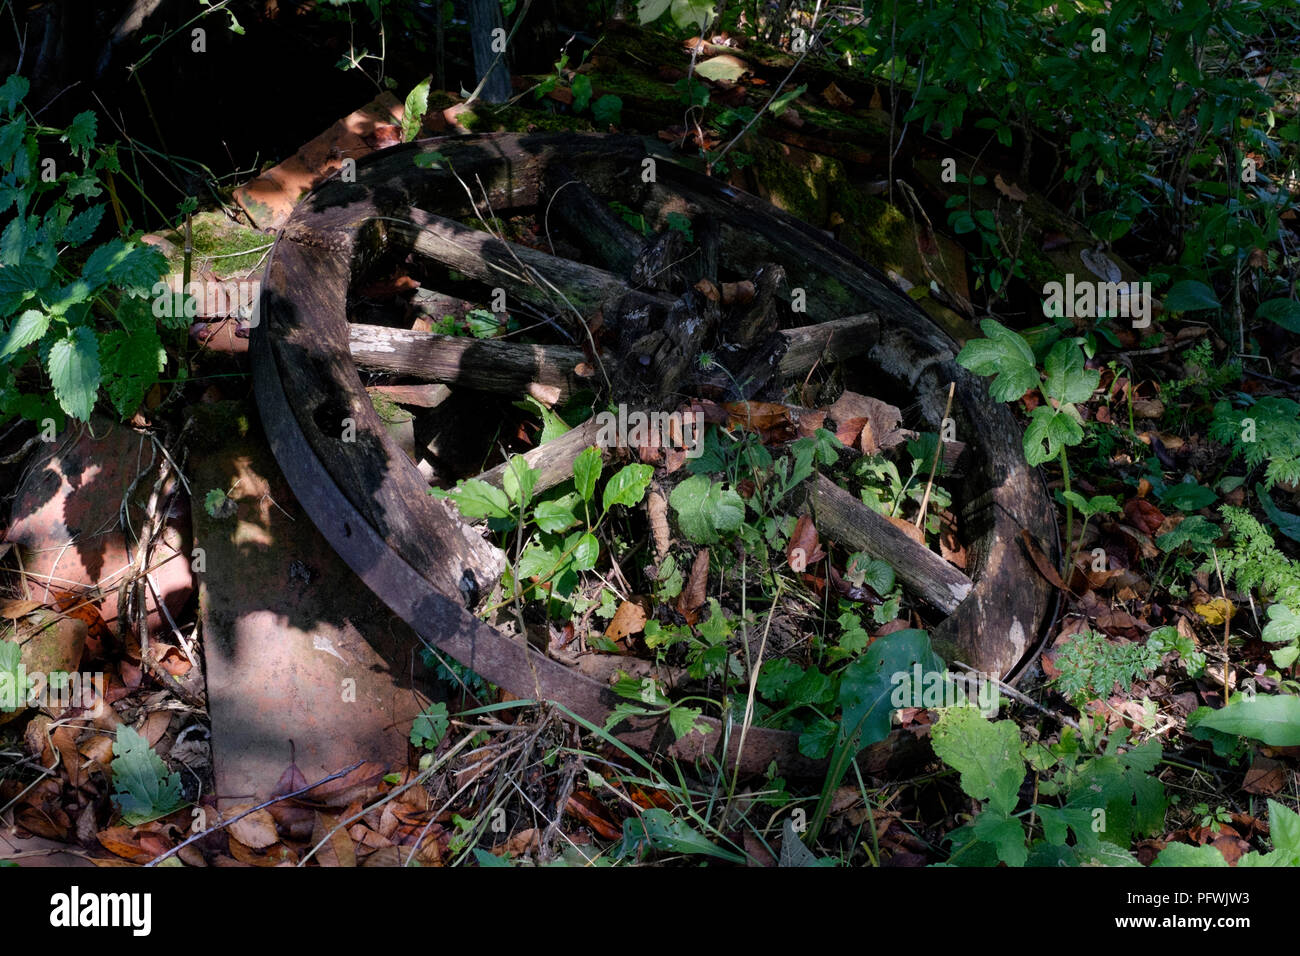 wooden remnants of a long forgotten well in an overgrown disused garden in a rural village zala county hungary Stock Photo